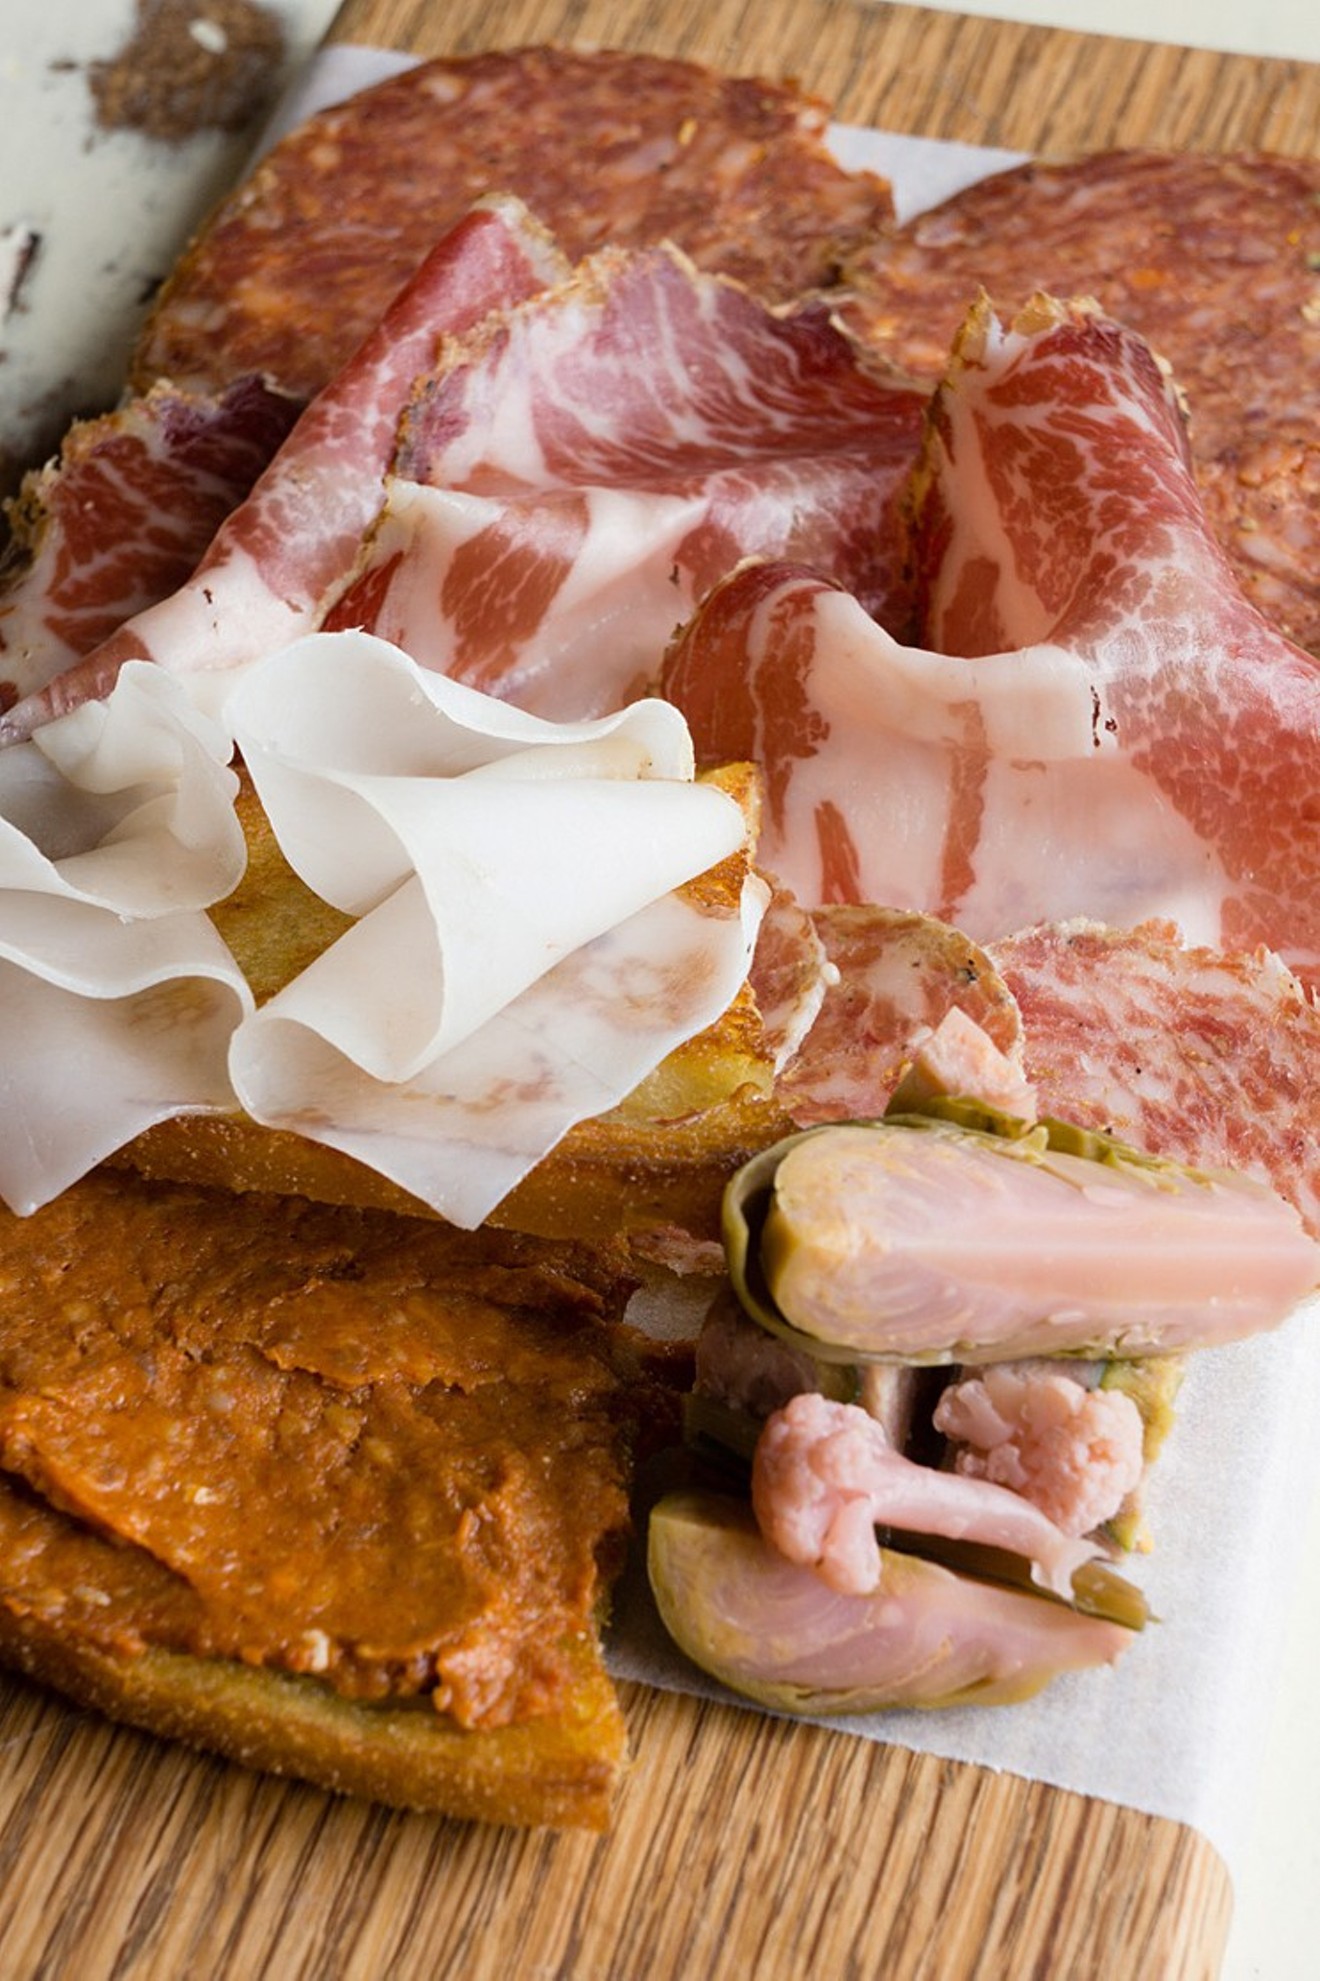 Lucia's Salumi Misto is about to get an entire restaurant in its honor.